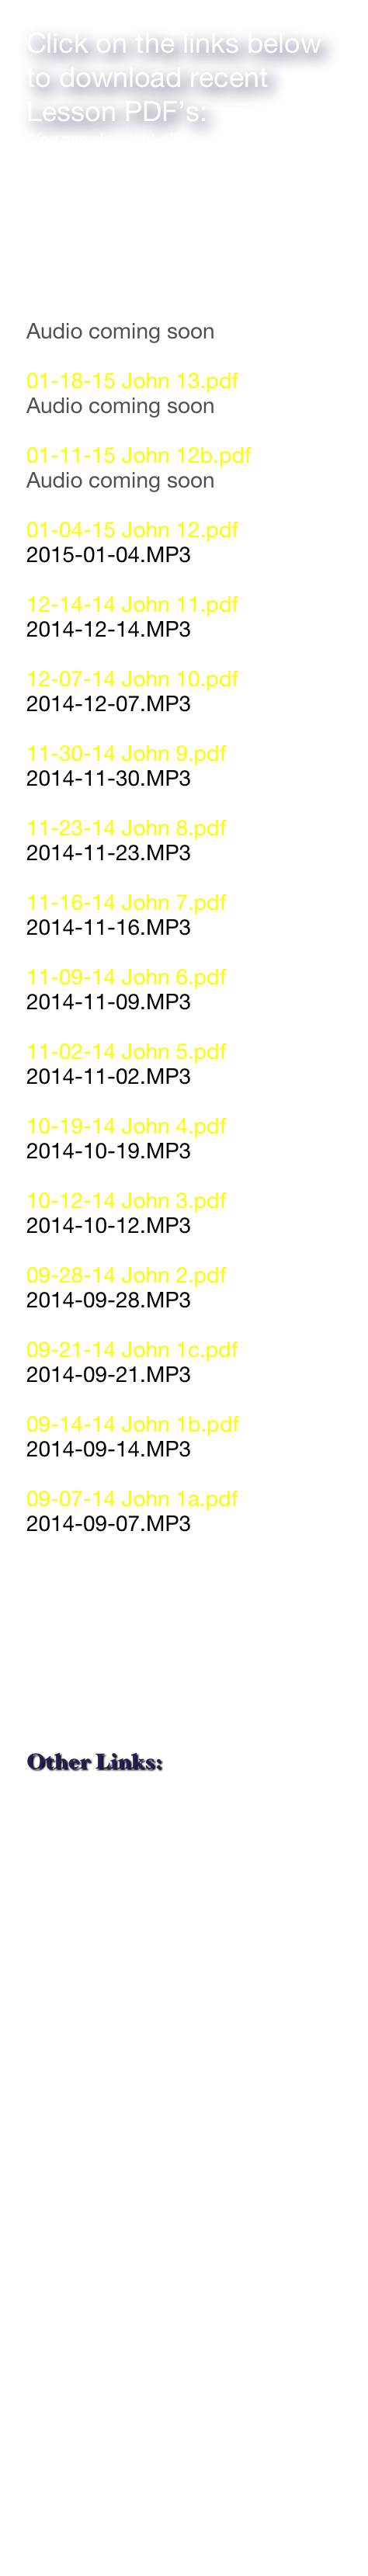 Click on the links below to download recent Lesson PDF’s:
(You can also right-click and “save as”)

(please note that some PDF’s are very large files and can take several minutes to appear)

02-01-15 John 14.pdf
Audio coming soon

01-18-15 John 13.pdf
Audio coming soon

01-11-15 John 12b.pdf
Audio coming soon

01-04-15 John 12.pdf
2015-01-04.MP3

12-14-14 John 11.pdf
2014-12-14.MP3

12-07-14 John 10.pdf
2014-12-07.MP3

11-30-14 John 9.pdf
2014-11-30.MP3

11-23-14 John 8.pdf
2014-11-23.MP3

11-16-14 John 7.pdf
2014-11-16.MP3

11-09-14 John 6.pdf
2014-11-09.MP3

11-02-14 John 5.pdf
2014-11-02.MP3

10-19-14 John 4.pdf
2014-10-19.MP3

10-12-14 John 3.pdf
2014-10-12.MP3

09-28-14 John 2.pdf
2014-09-28.MP3

09-21-14 John 1c.pdf
2014-09-21.MP3

09-14-14 John 1b.pdf
2014-09-14.MP3

09-07-14 John 1a.pdf
2014-09-07.MP3








Other Links:
PROBE MINISTRIES
POINT OF VIEW
INSTITUTE  FOR
       CREATION RESEARCH
DAY 4
PRESTONWOOD

